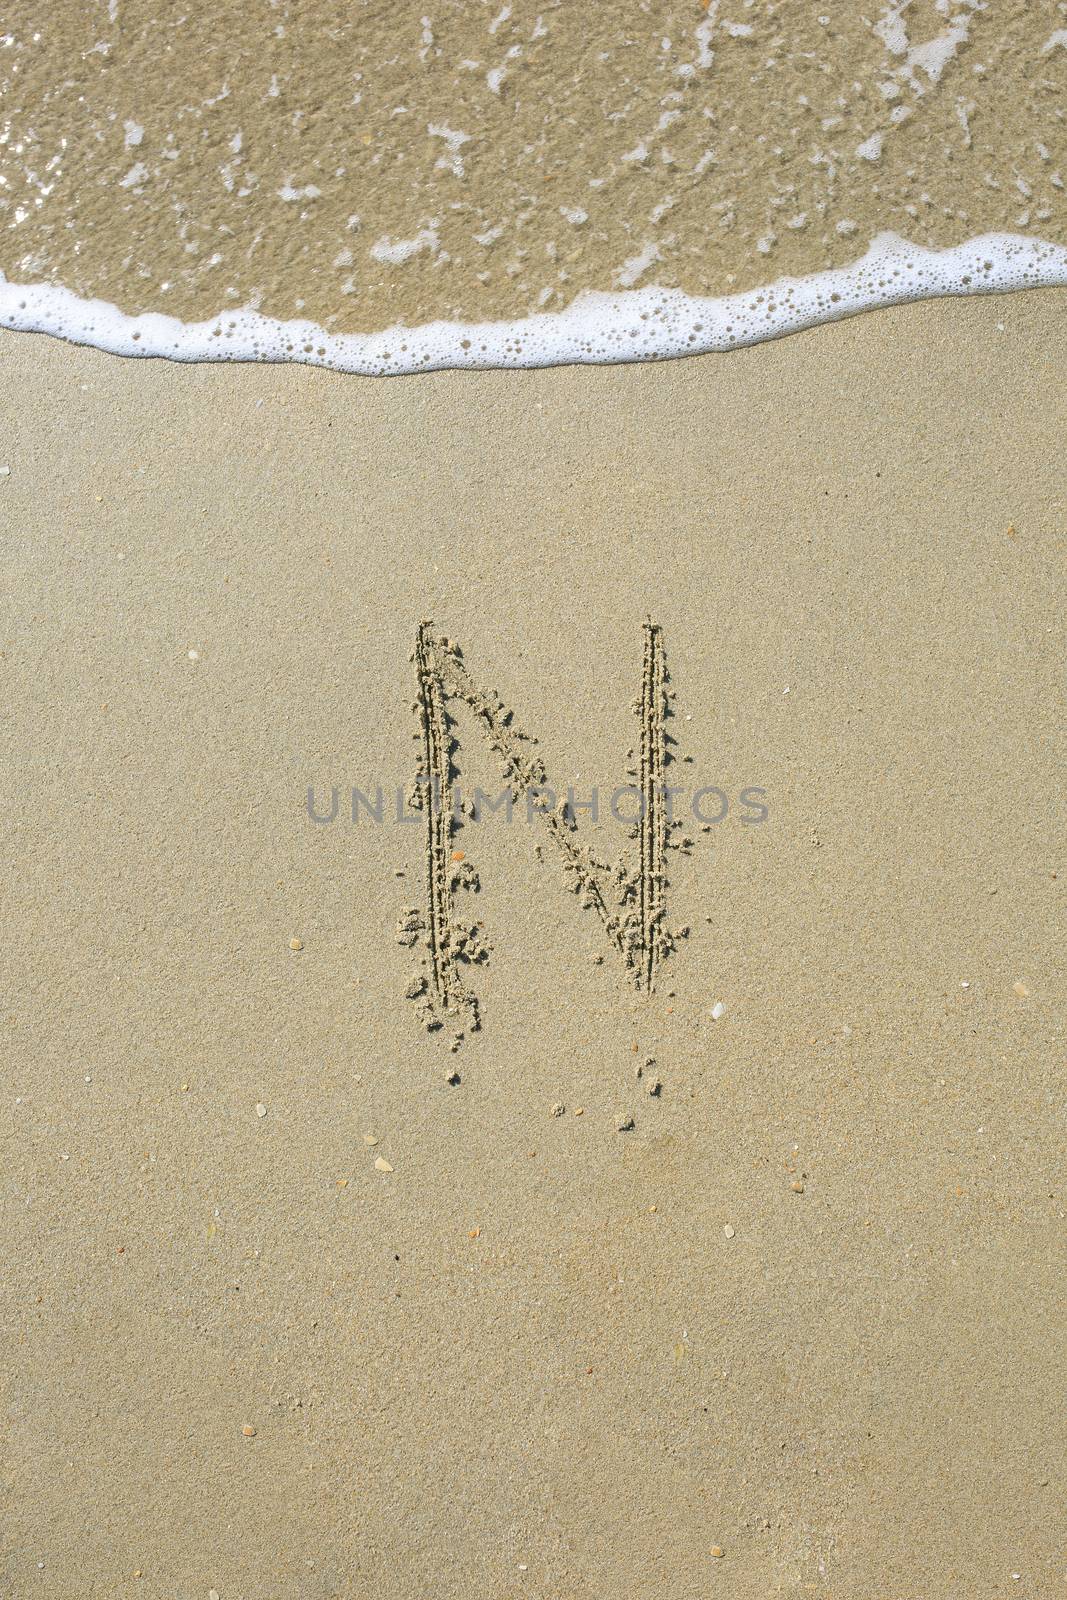 Letter drawn on the sand beach